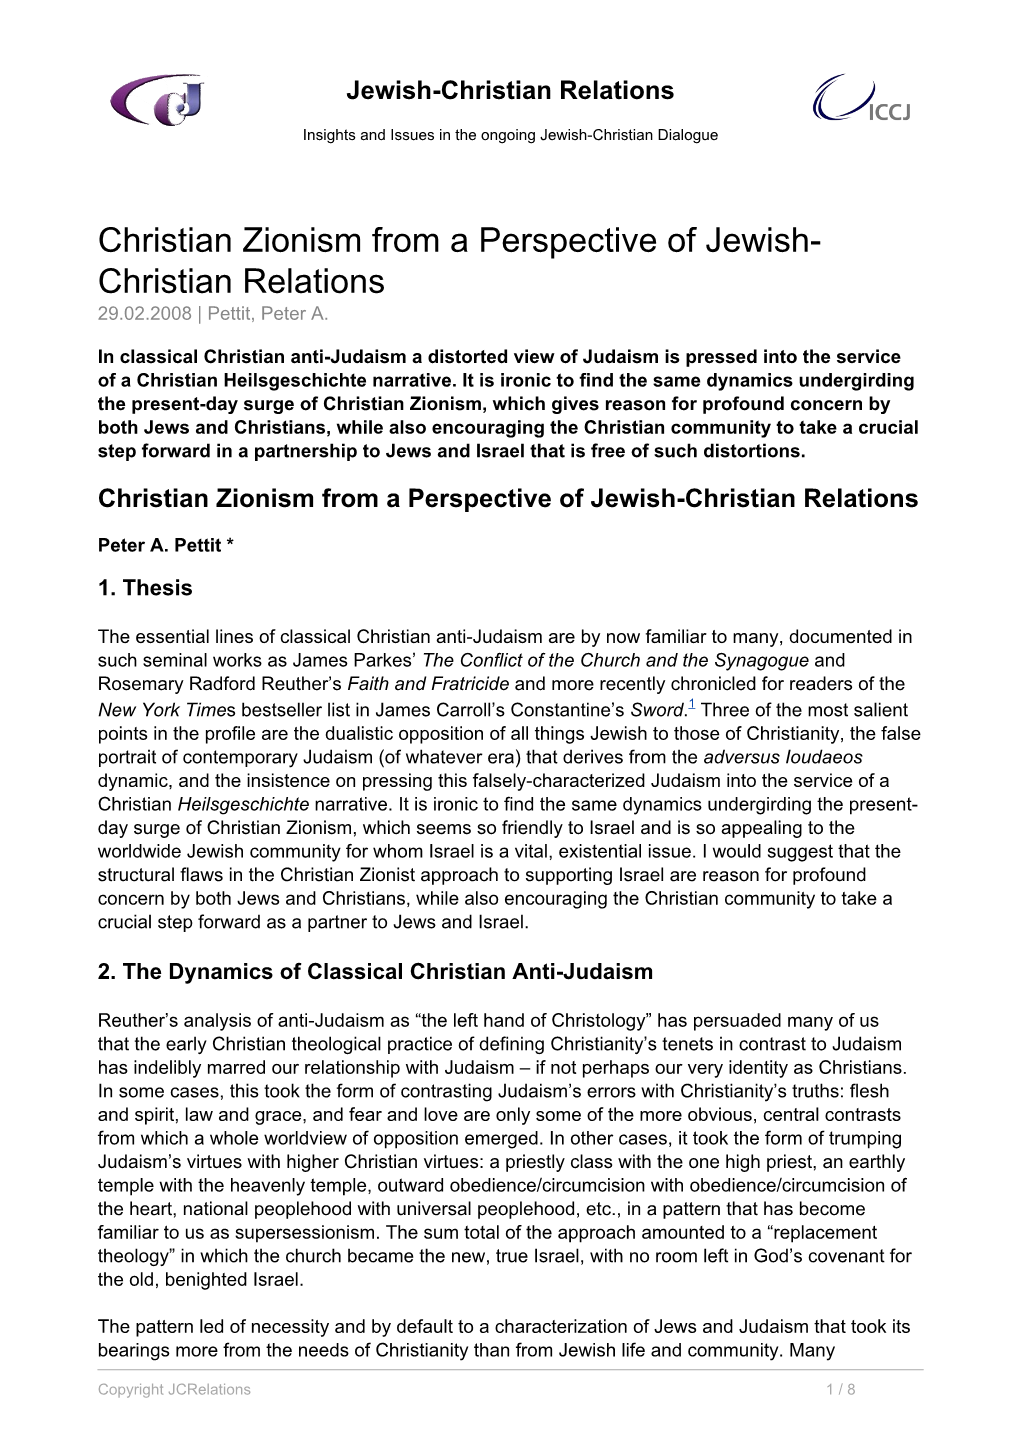 Christian Zionism from a Perspective of Jewish-Christian Relations